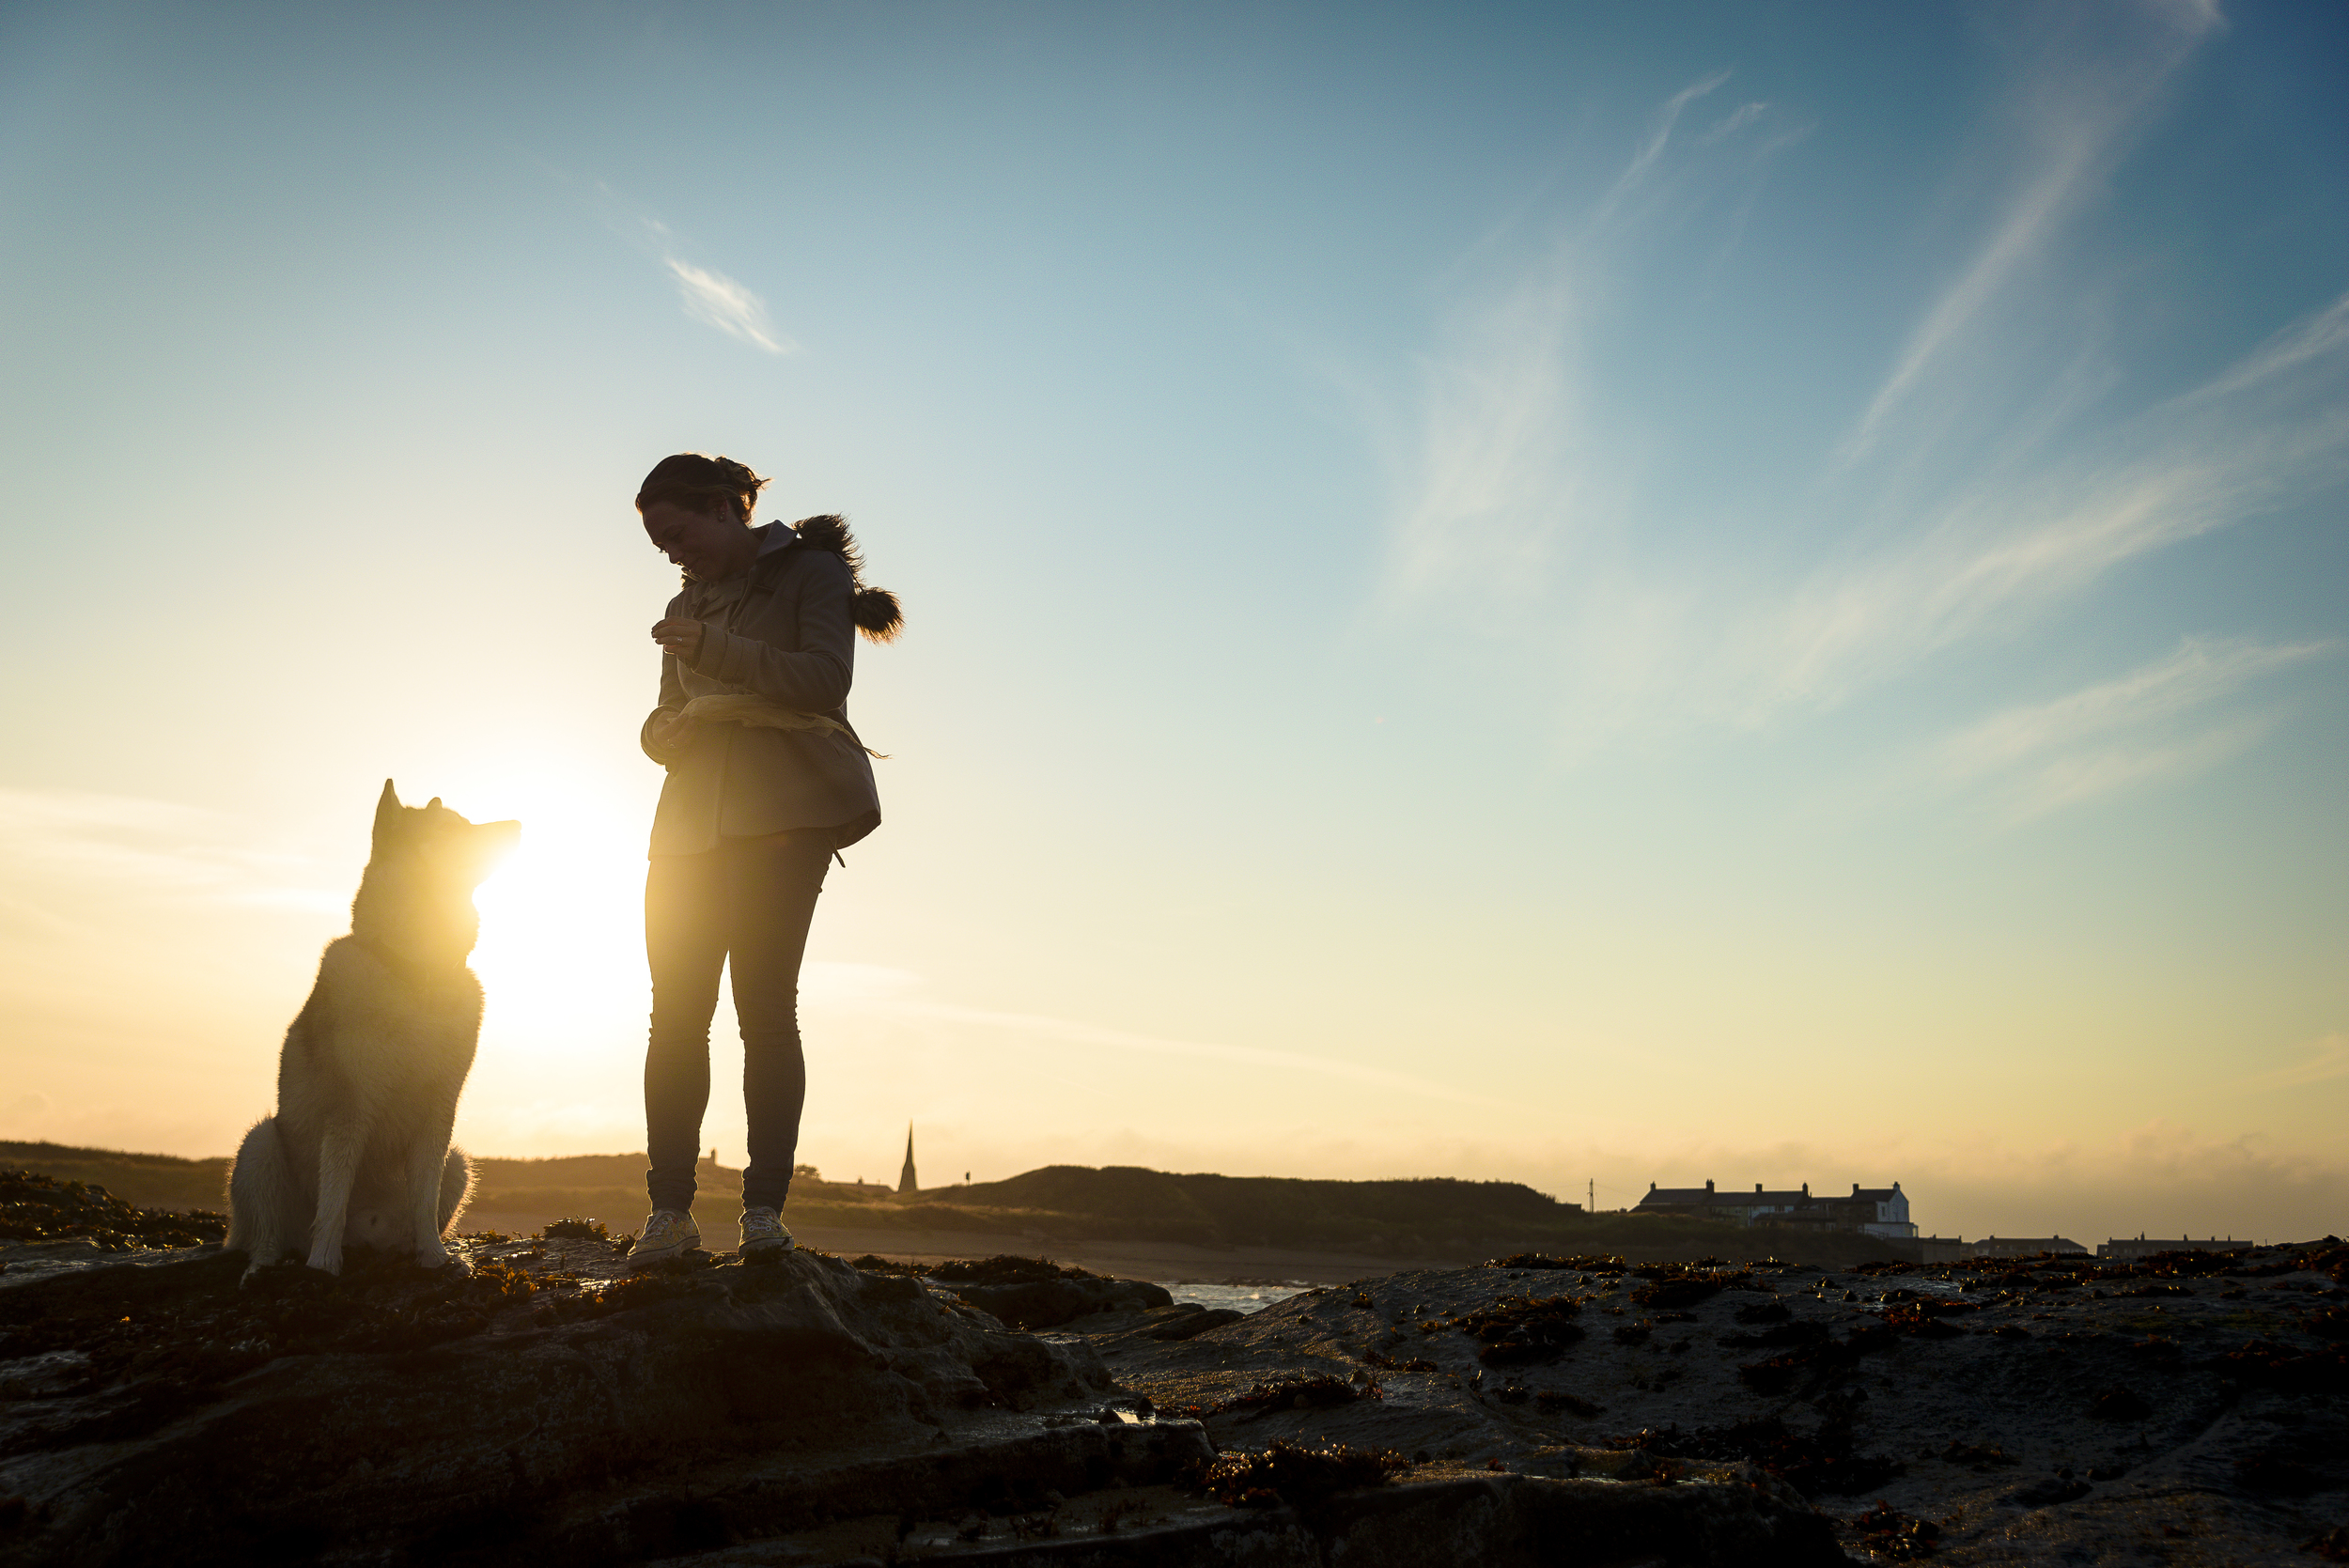 Sunset Silhouette with my wife Maddy and dog Nanuq.